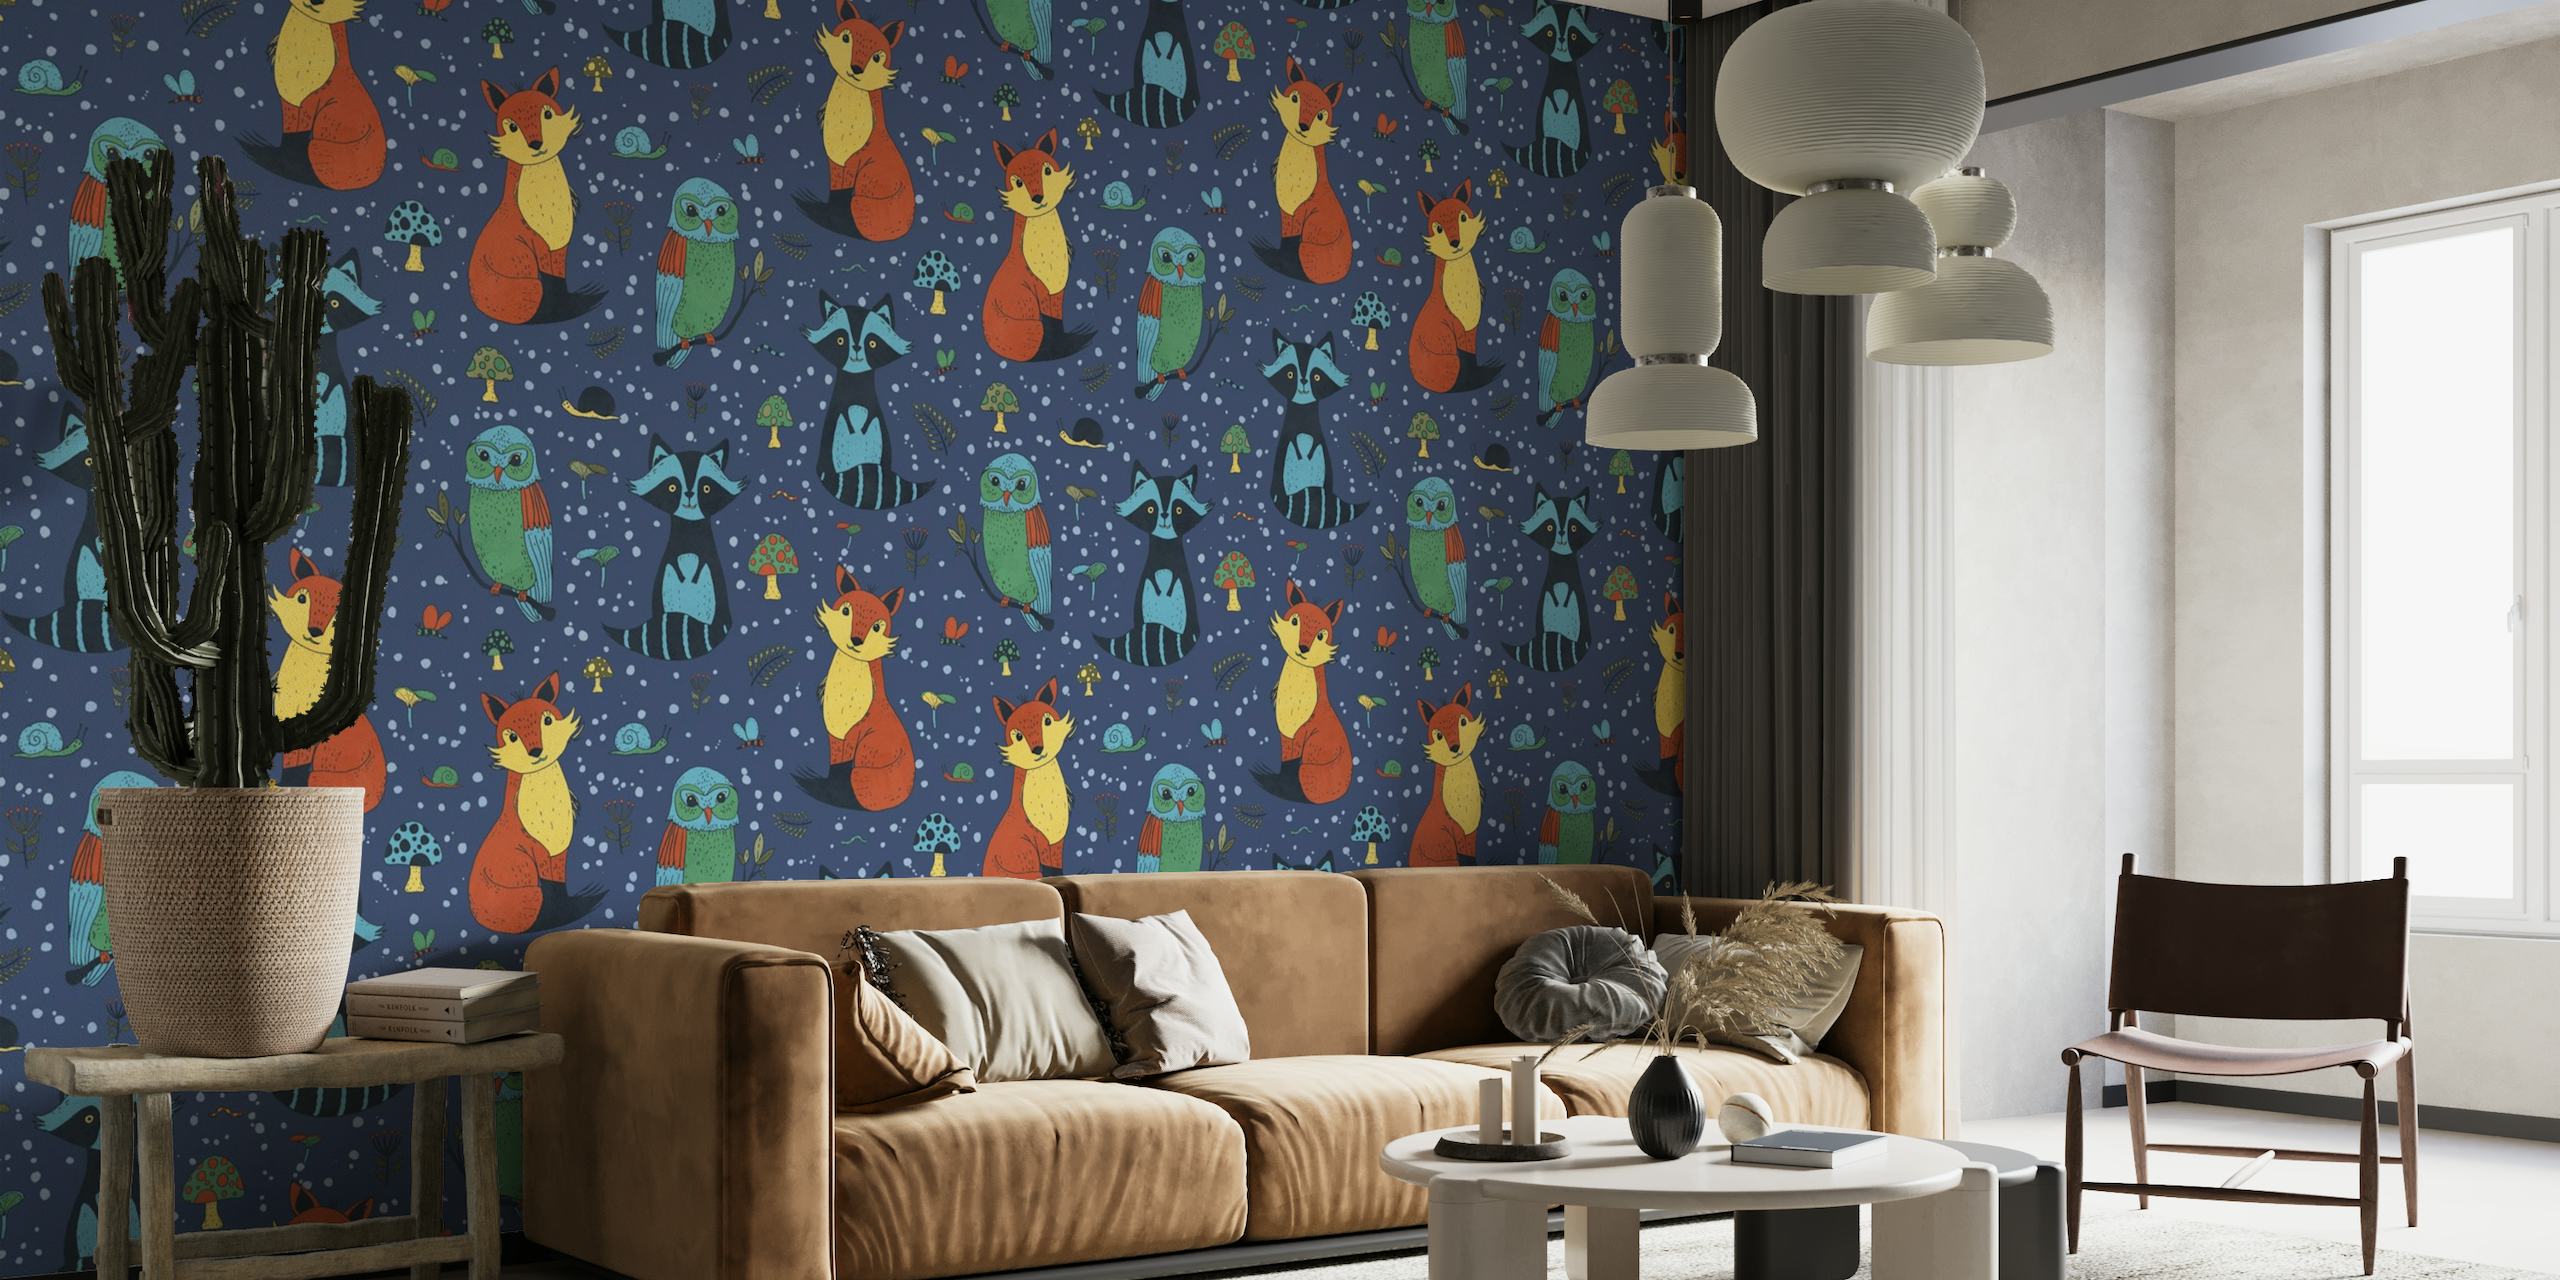 Forest Animals Pattern Spring Night wall mural with foxes, owls, and raccoons